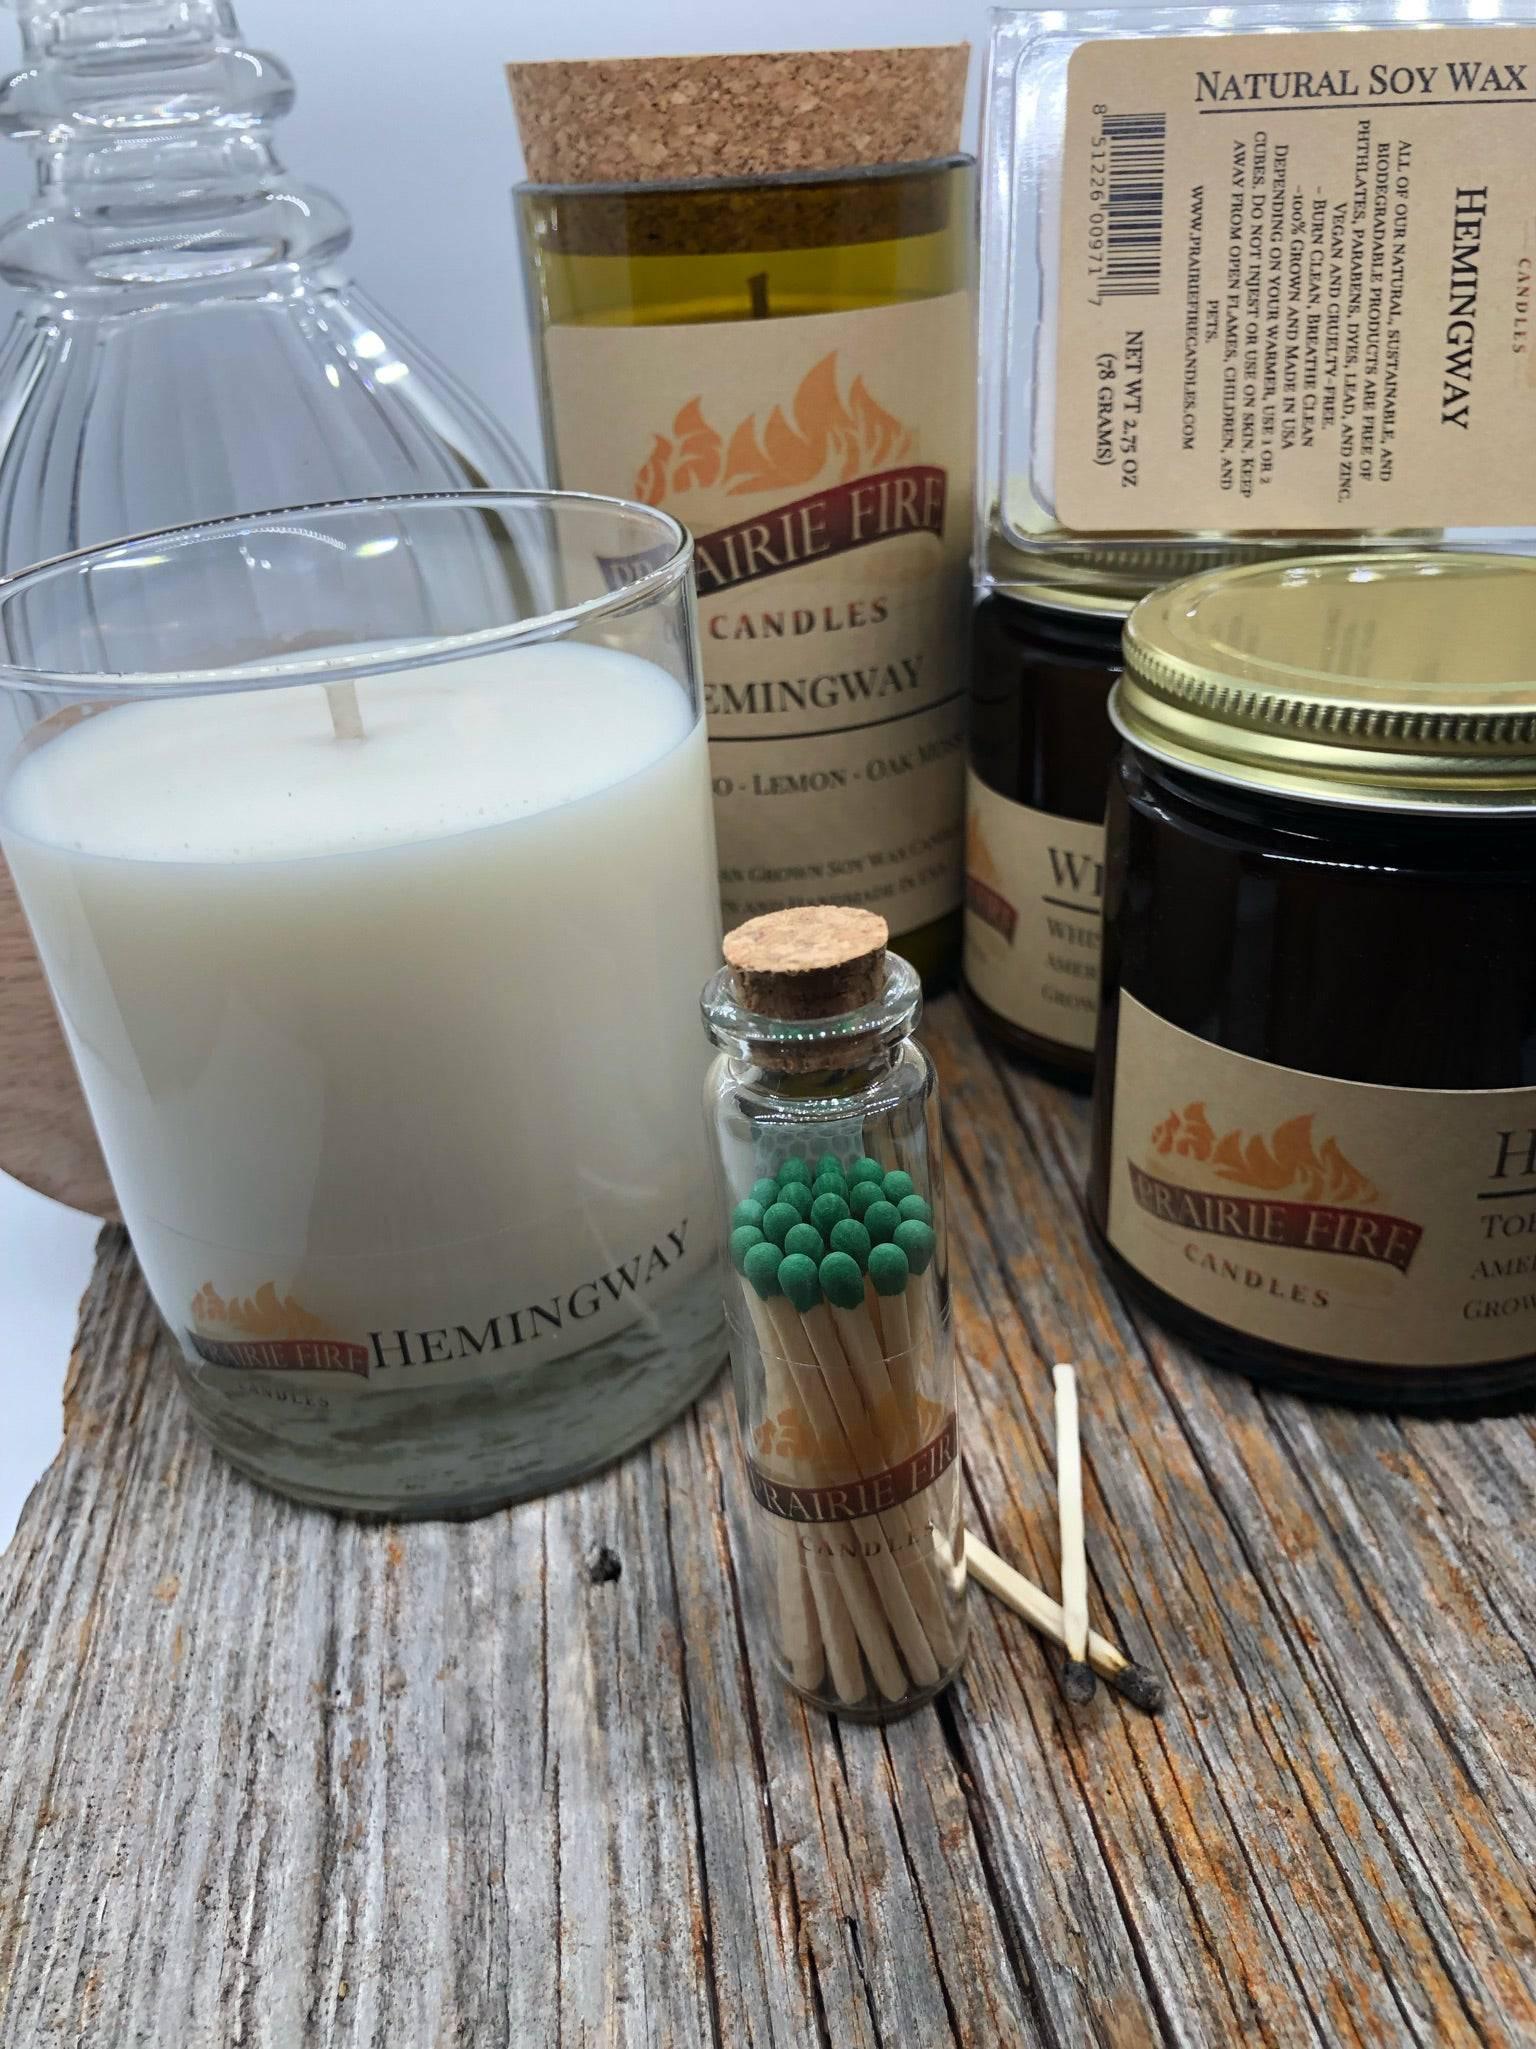 Hemingway Soy Wax Candle | Repurposed Wine Bottle Candle Natural Cork | Handmade in USA Candle | Eco-Friendly Candle | Non-Toxic Soy Candle - Prairie Fire Candles